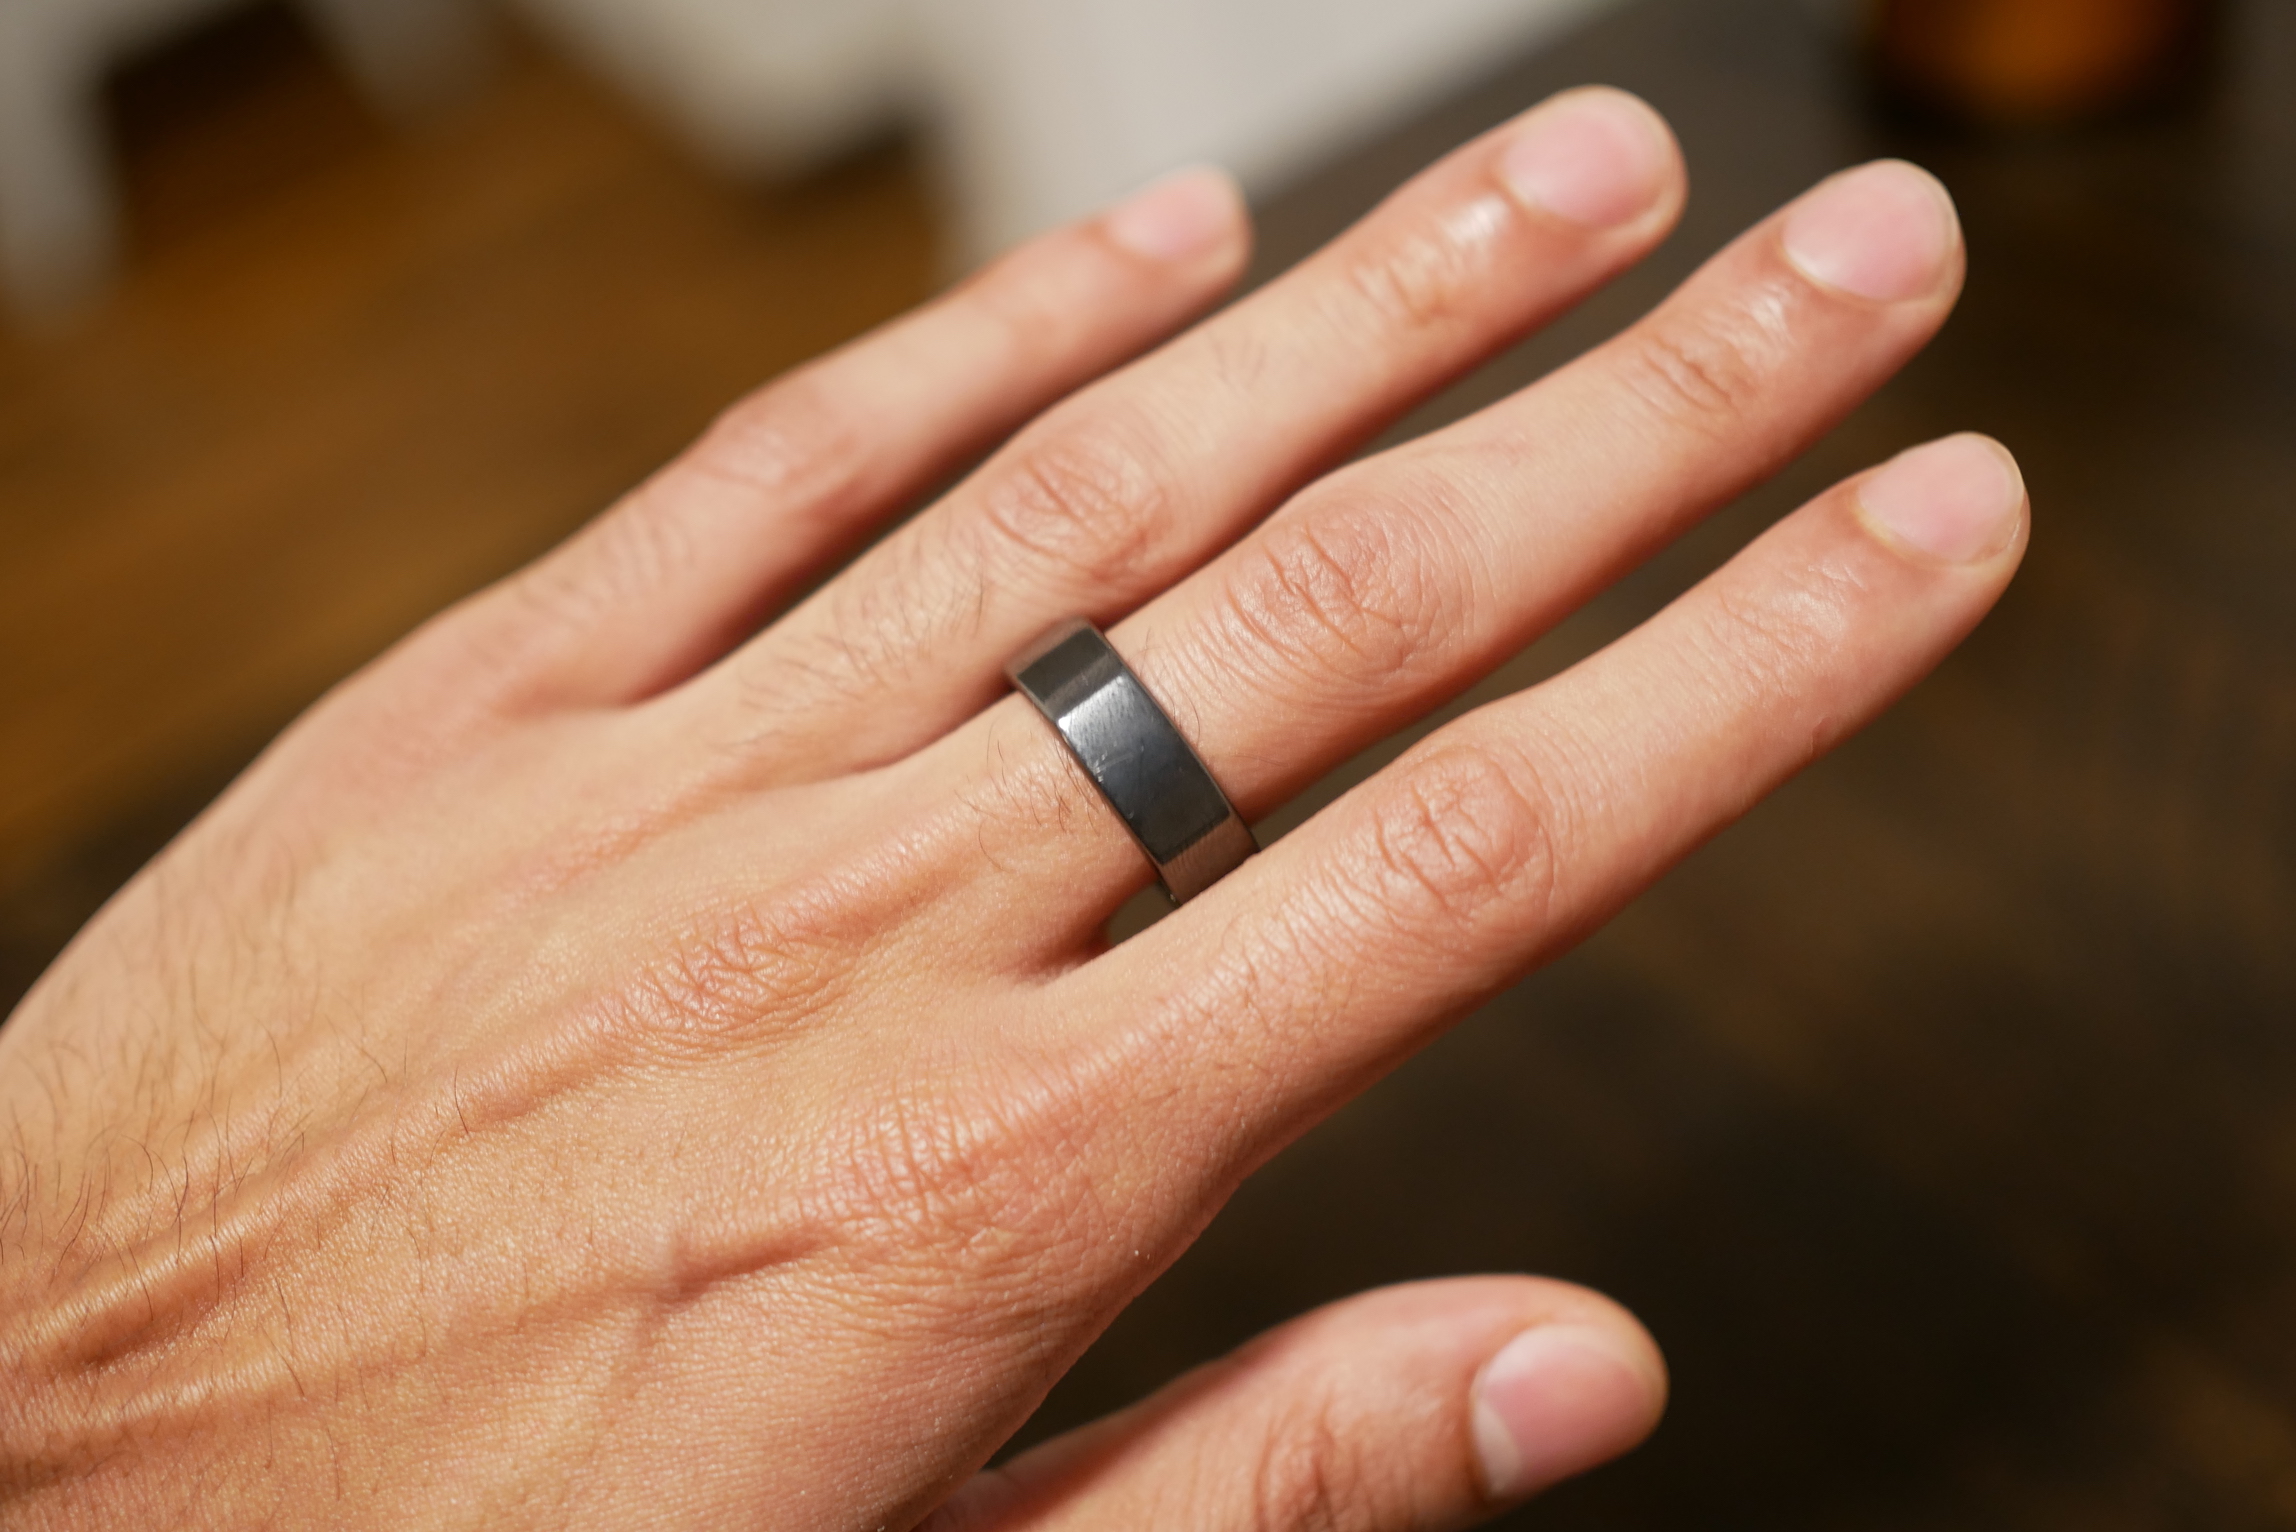 Review: Oura Ring 3 and Whoop 4.0 are 2 ambitious wearables, but